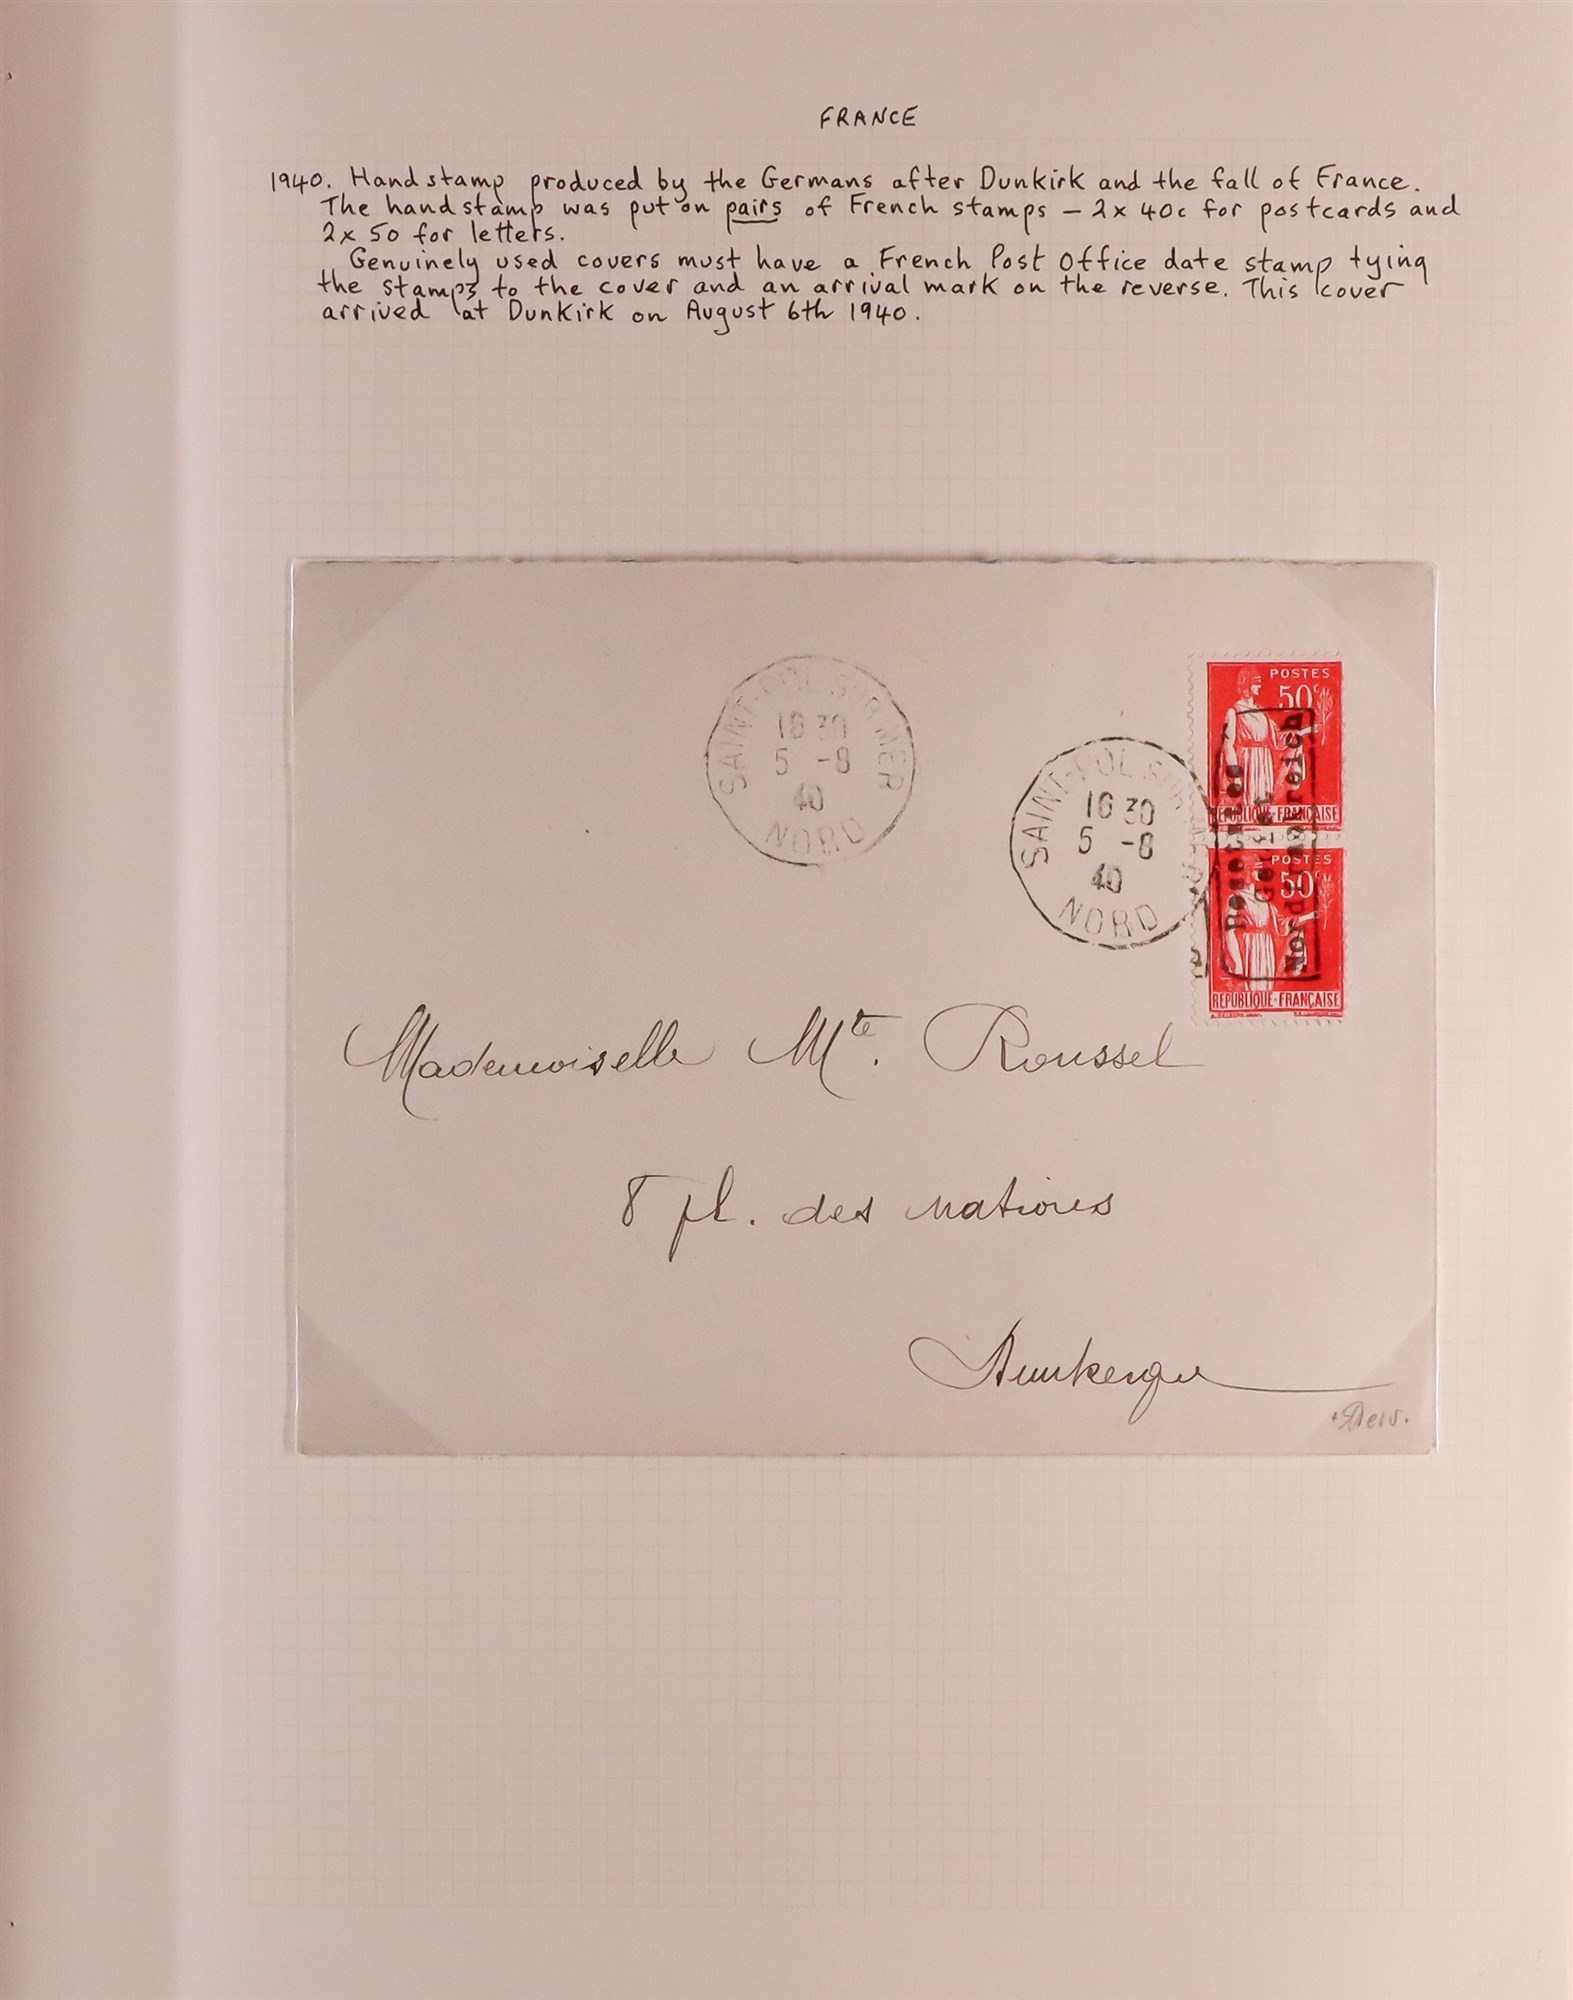 FRANCE 1940 DUNKERQUE. Two covers and mint pair with the "Besetztes / Gebiet / Nordfrankreich" - Image 3 of 3